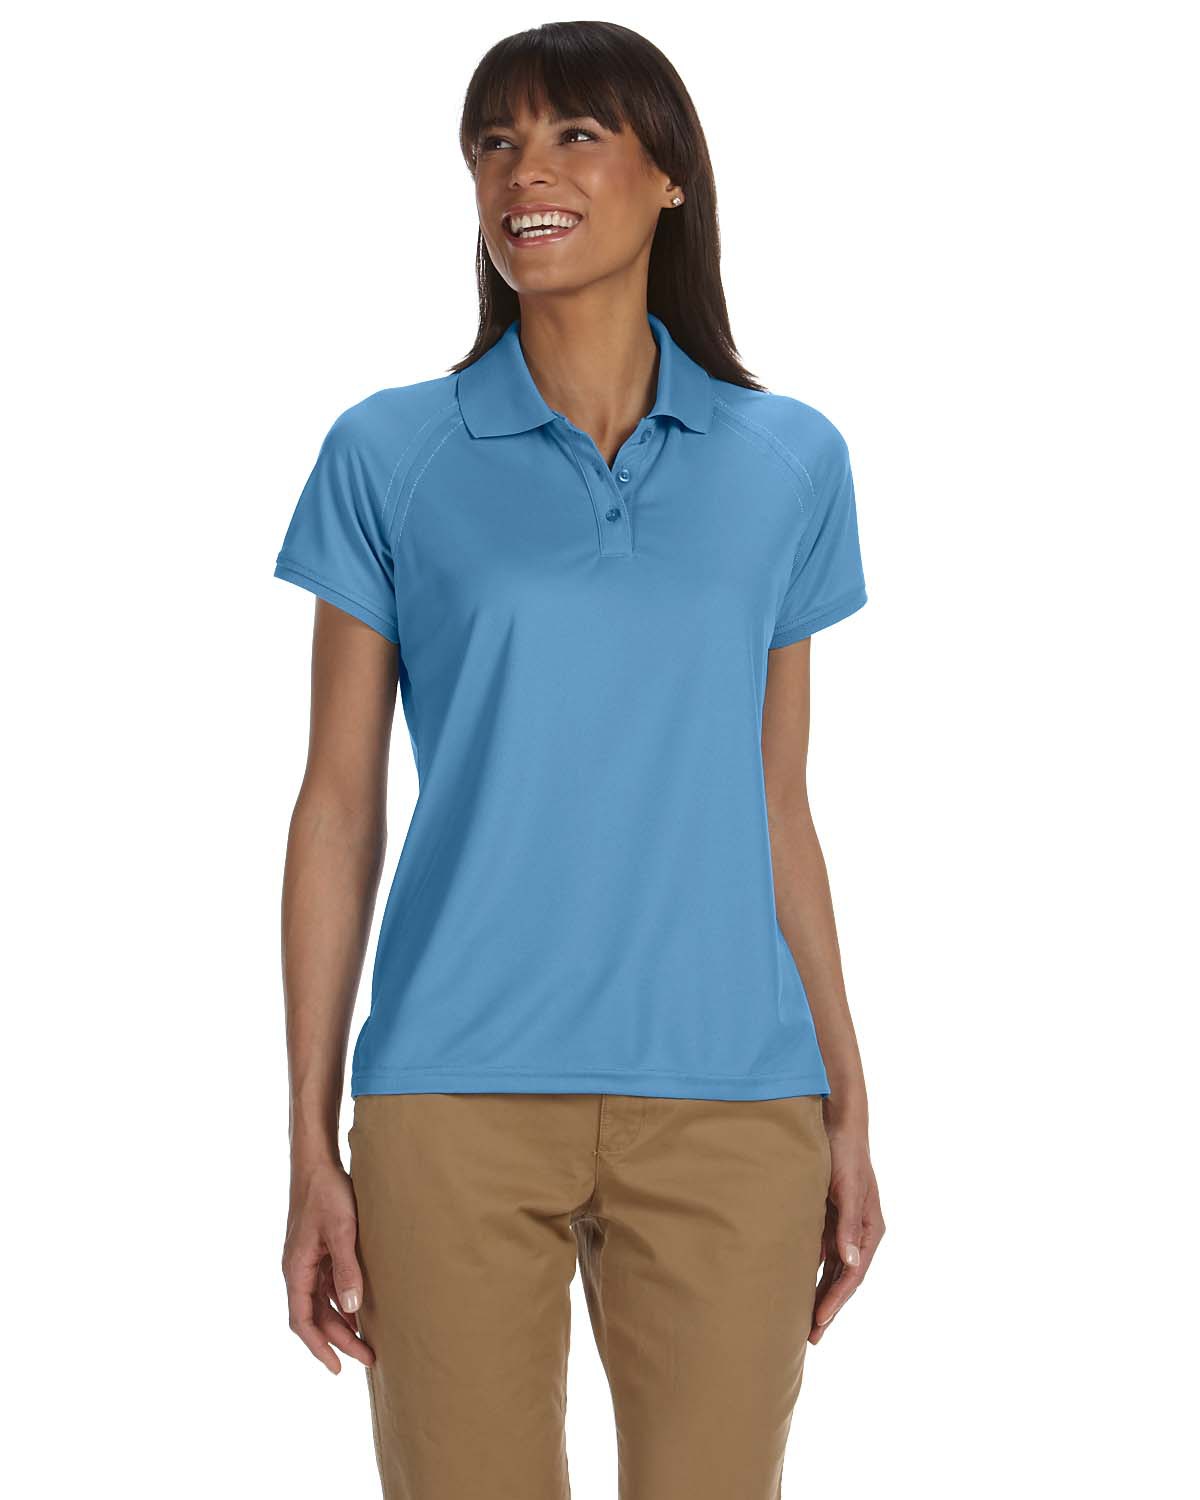 Chestnut Hill CH365W  Women's Technical Performance Polo